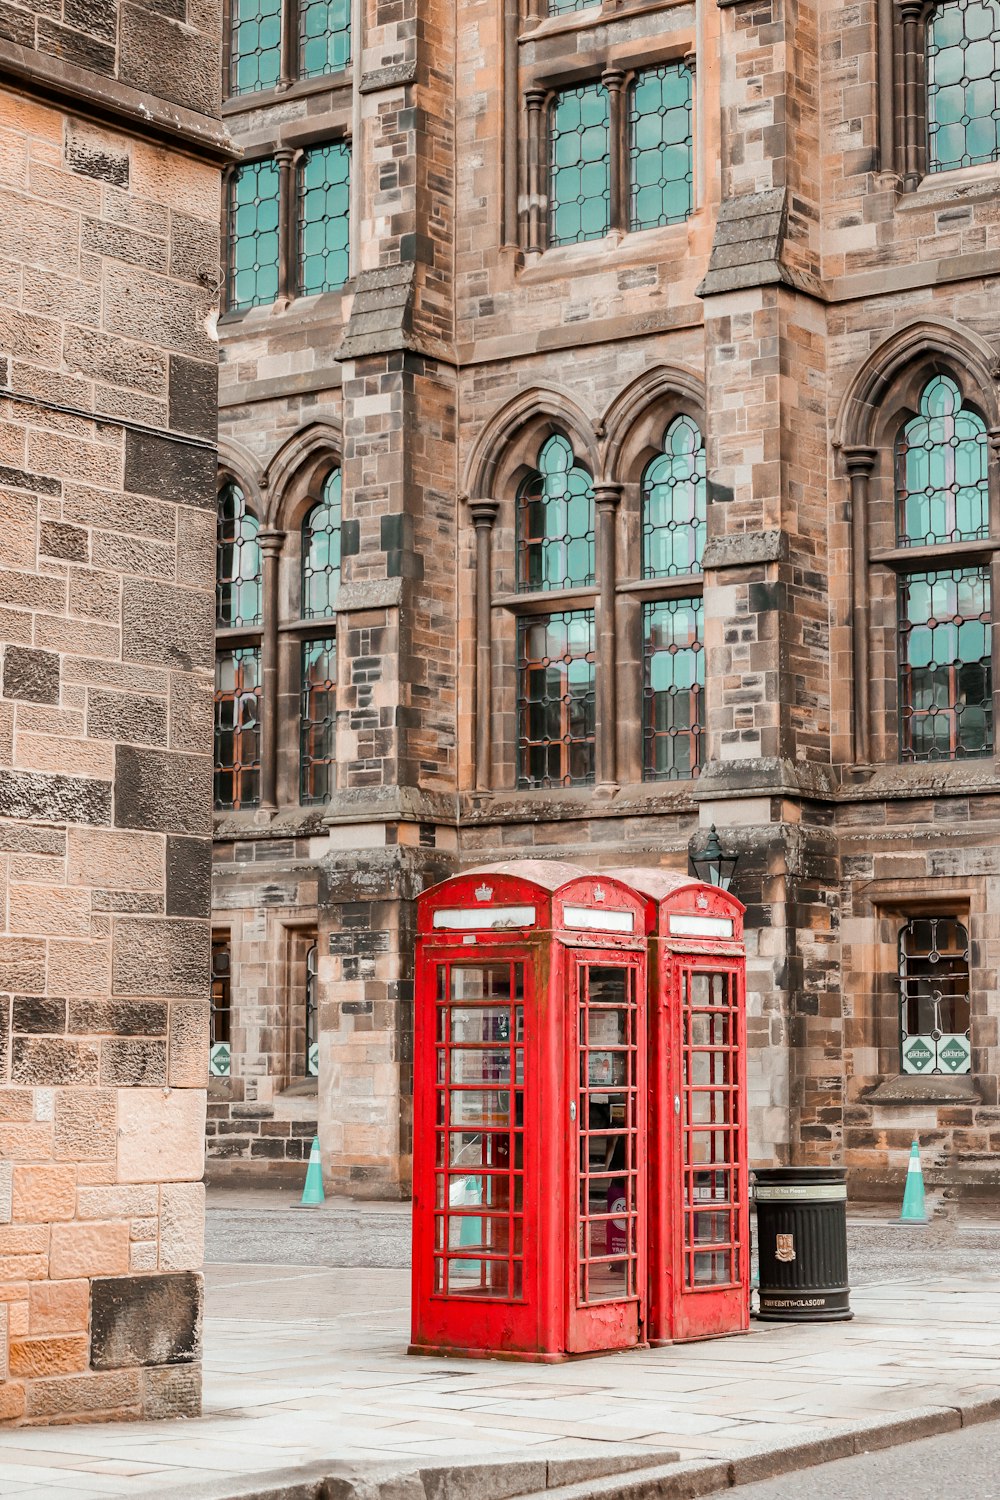 a couple of red phone booths sitting in front of a building